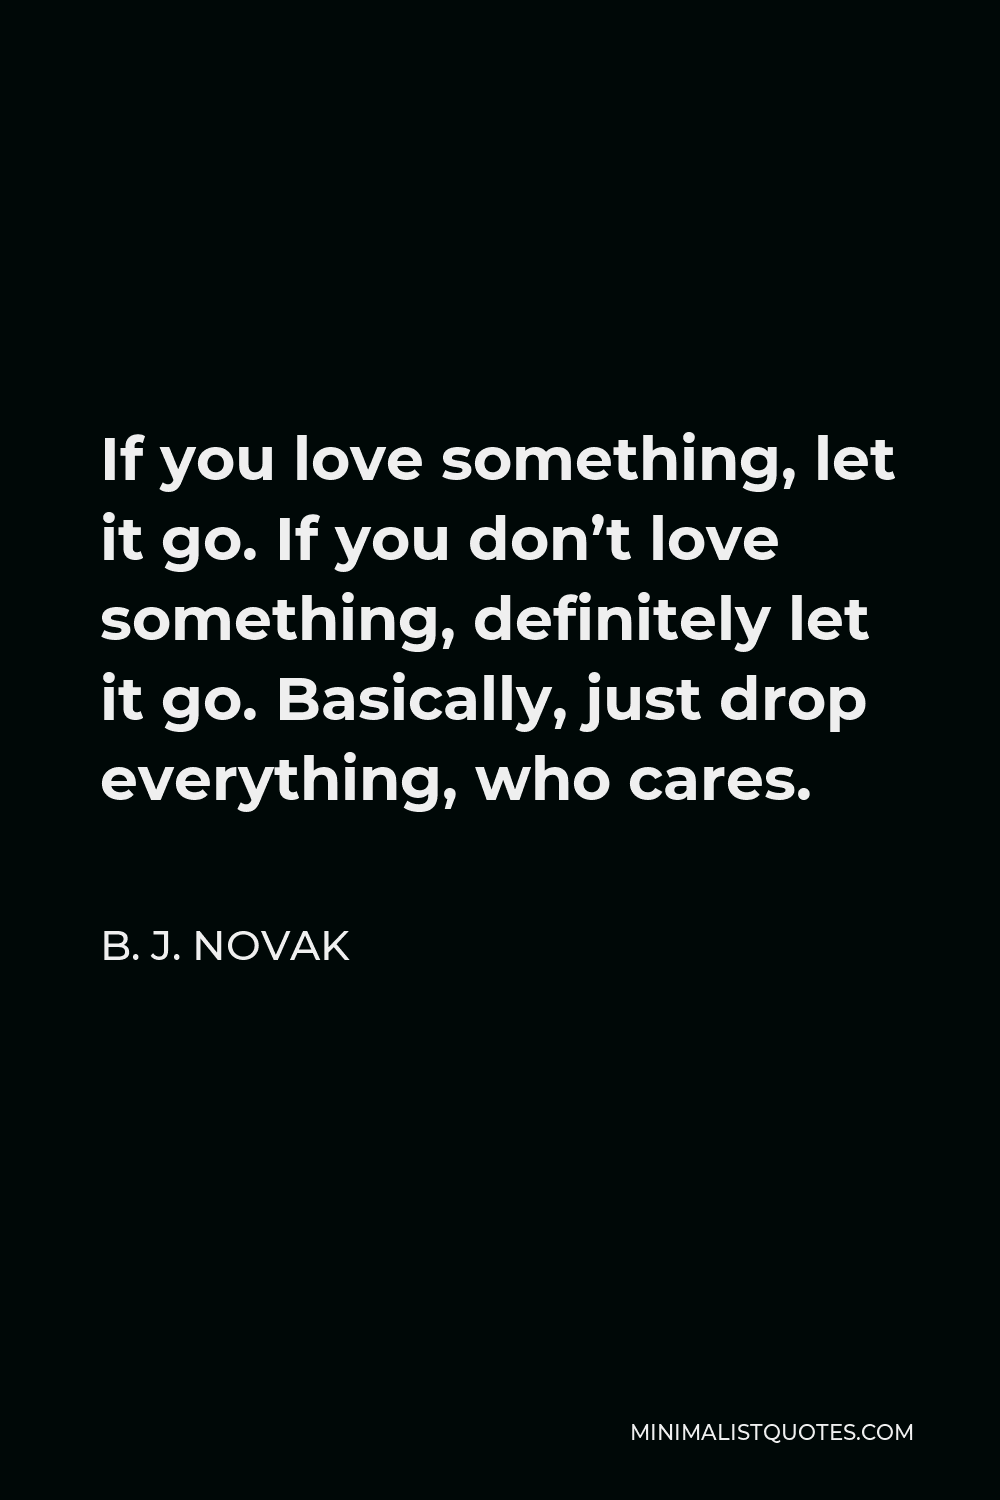 B. J. Novak Quote - If you love something, let it go. If you don’t love something, definitely let it go. Basically, just drop everything, who cares.